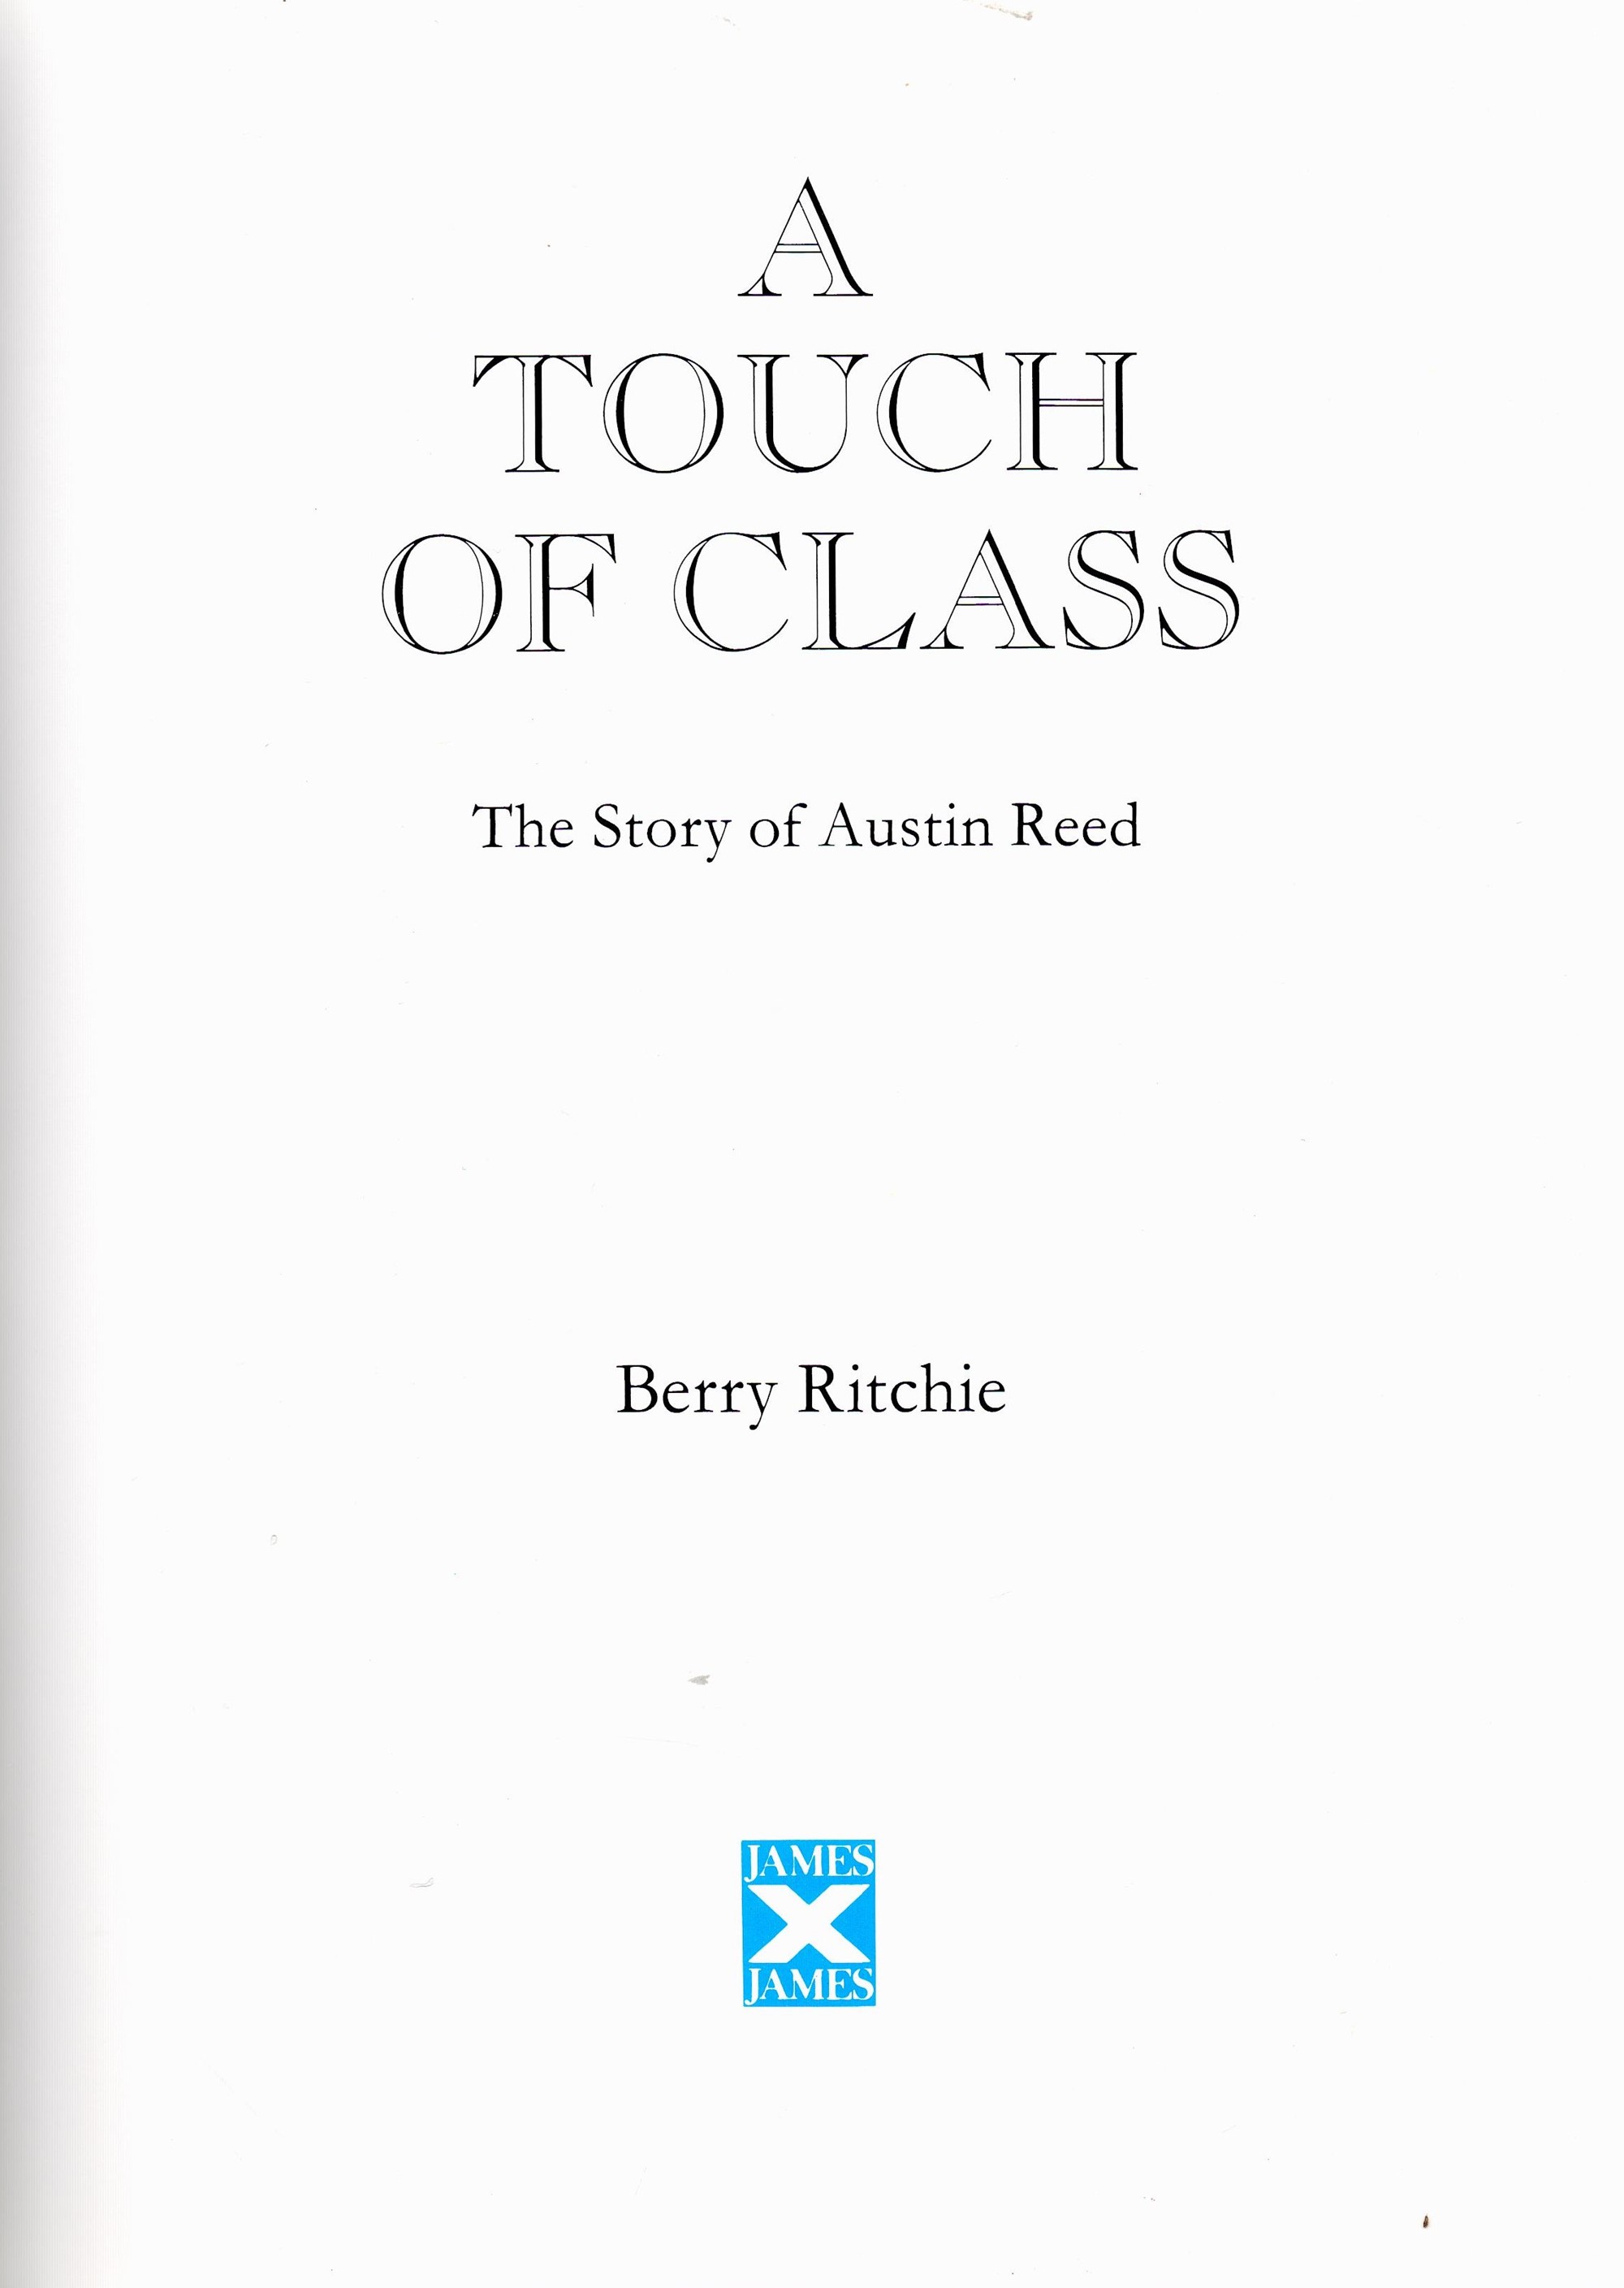 A Touch of Class Austin Reeds of Regent Street by Berry Ritchie Hardback Book 1990 First Edition - Image 4 of 6